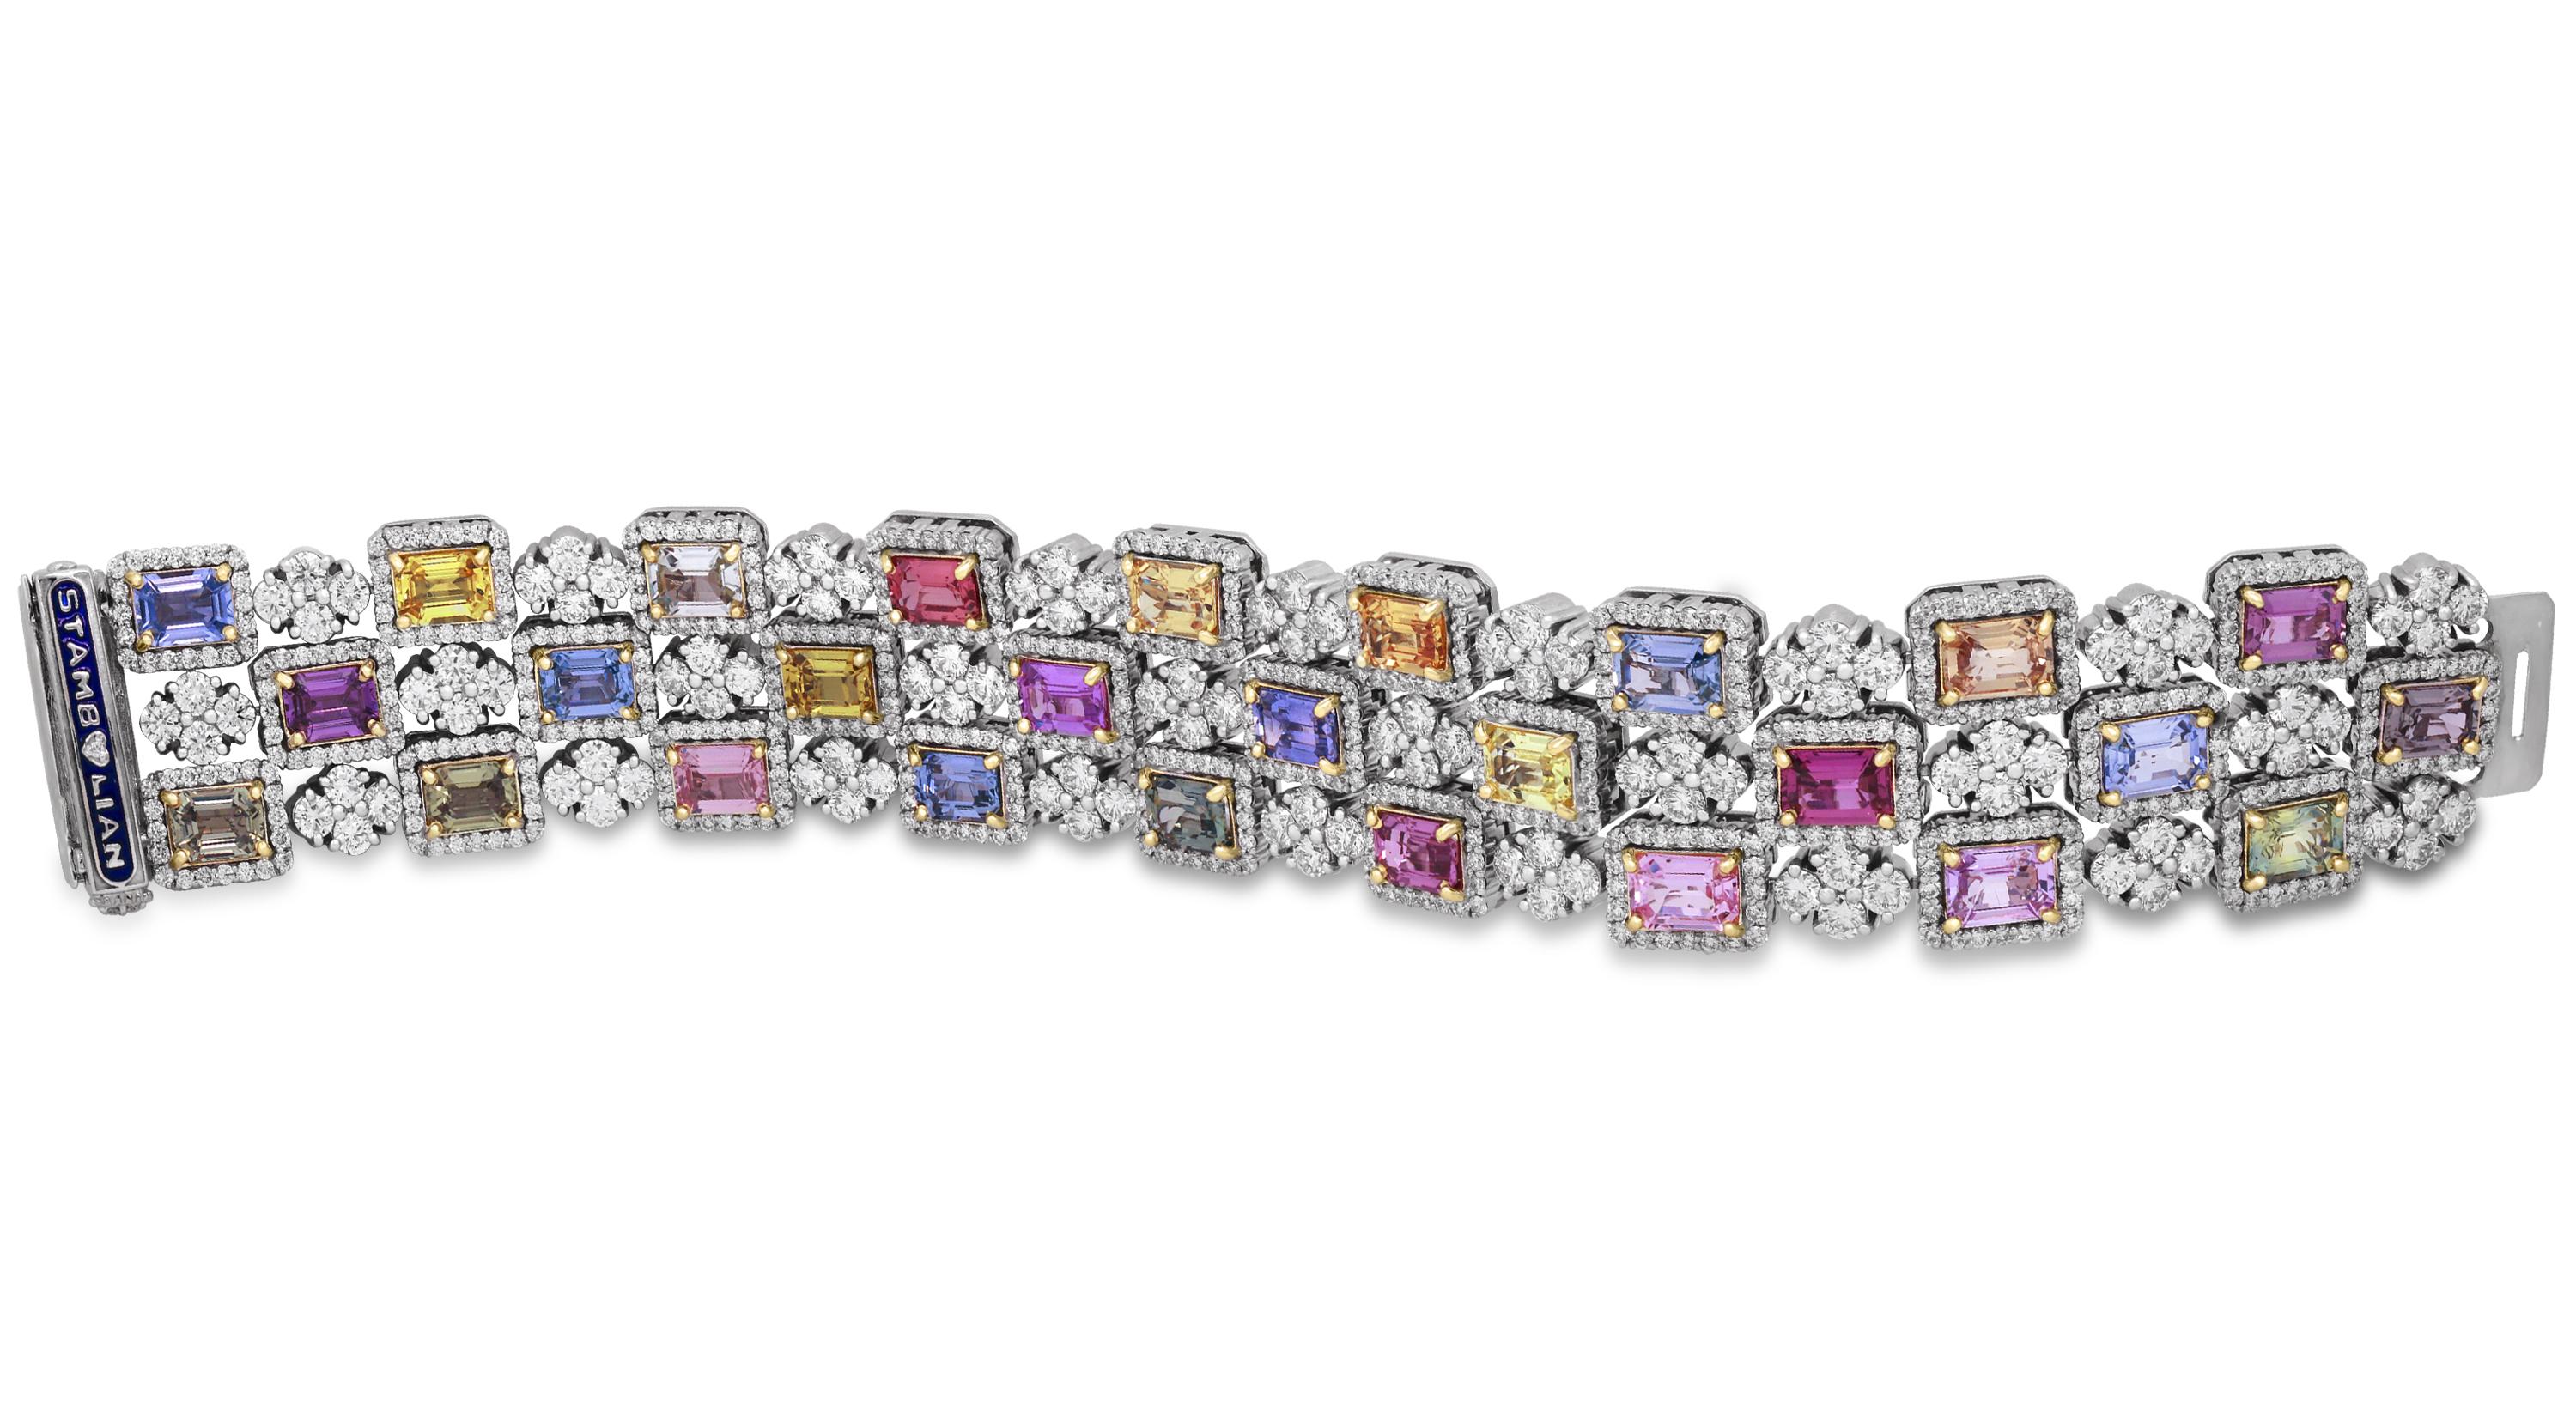 Stambolian GIA 32.40 Ct. No Heat Multi-Color Sapphires 18K Gold Diamond Bracelet

This one-of-a-kind masterpiece by Stambolian is the true example of 